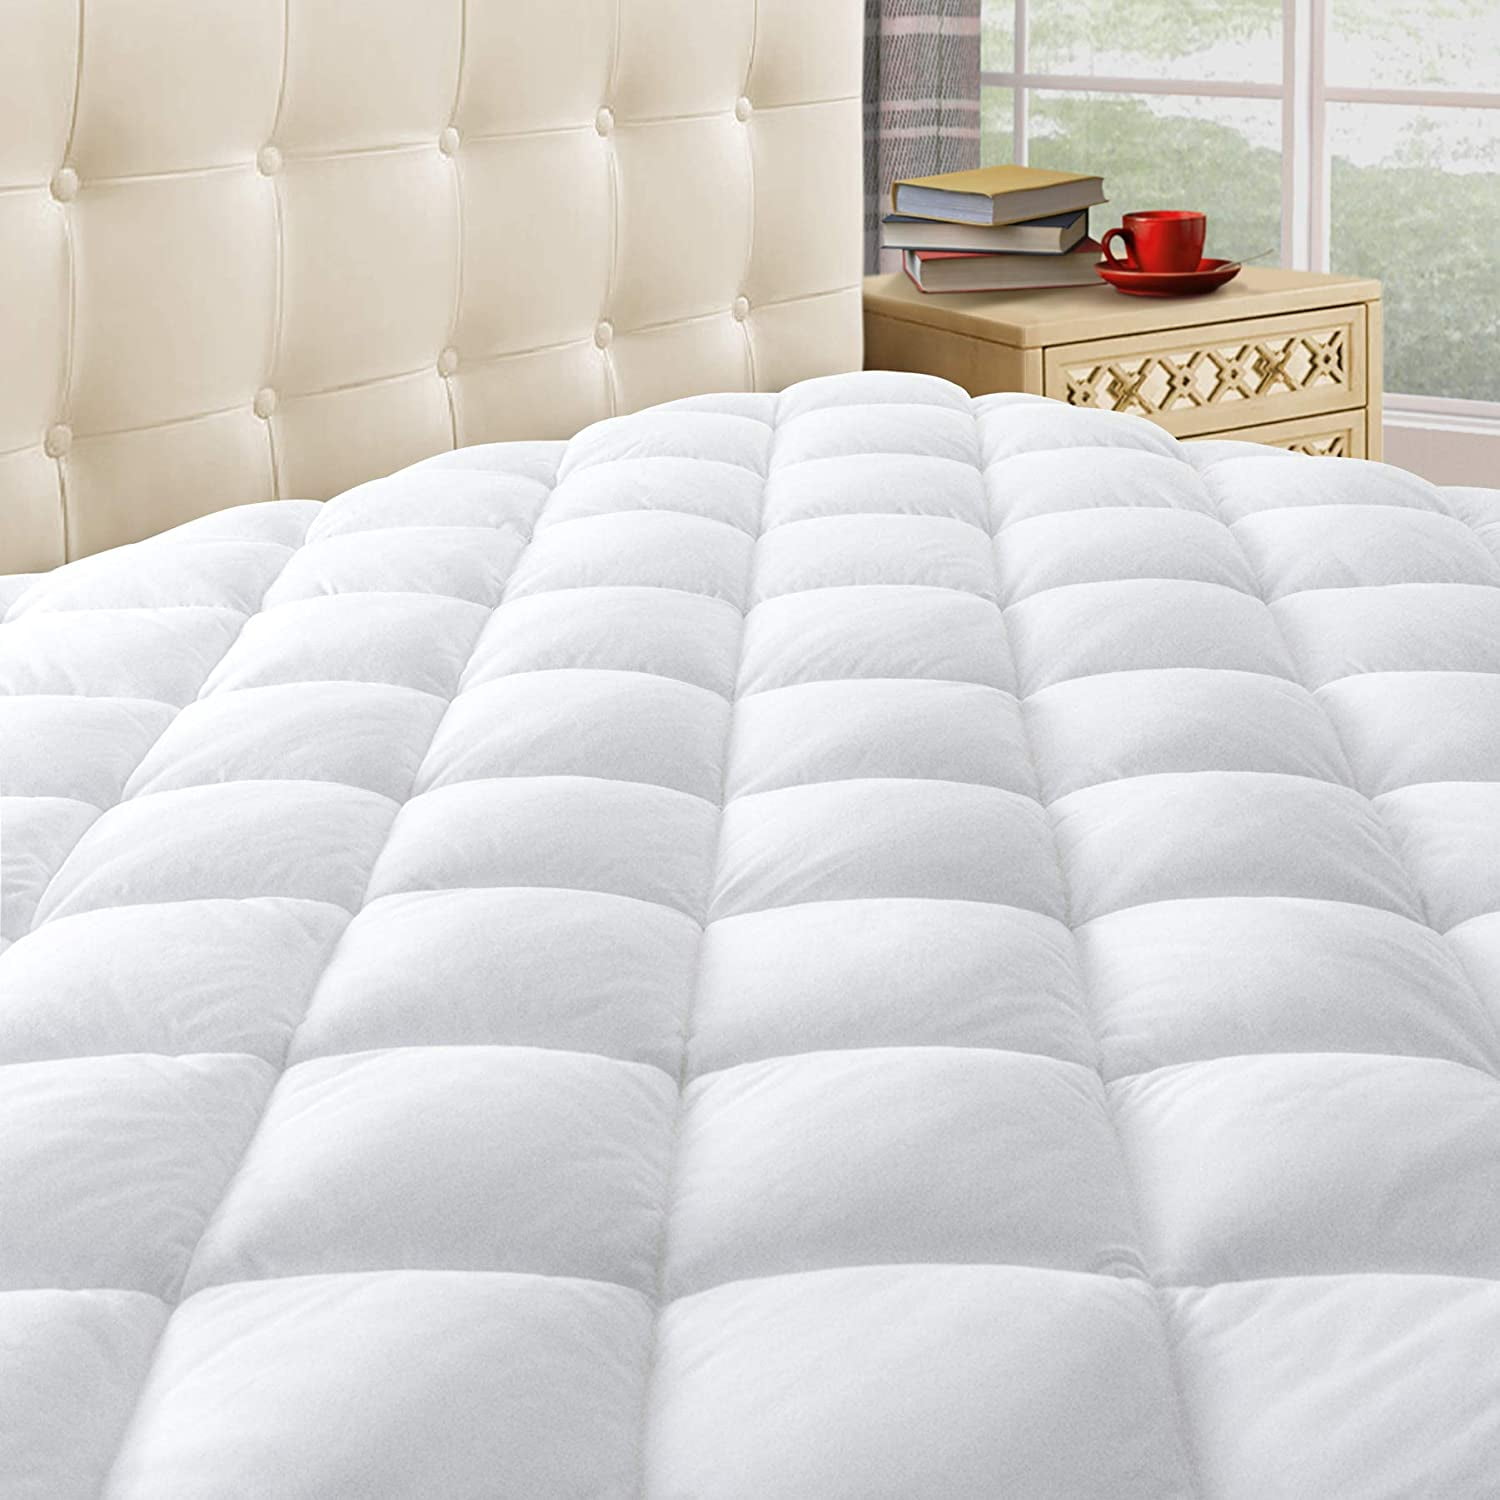 Details about   Pillow Top Mattress Pad Fitted Quilted Deep Pocket Breathable Matress Topper New